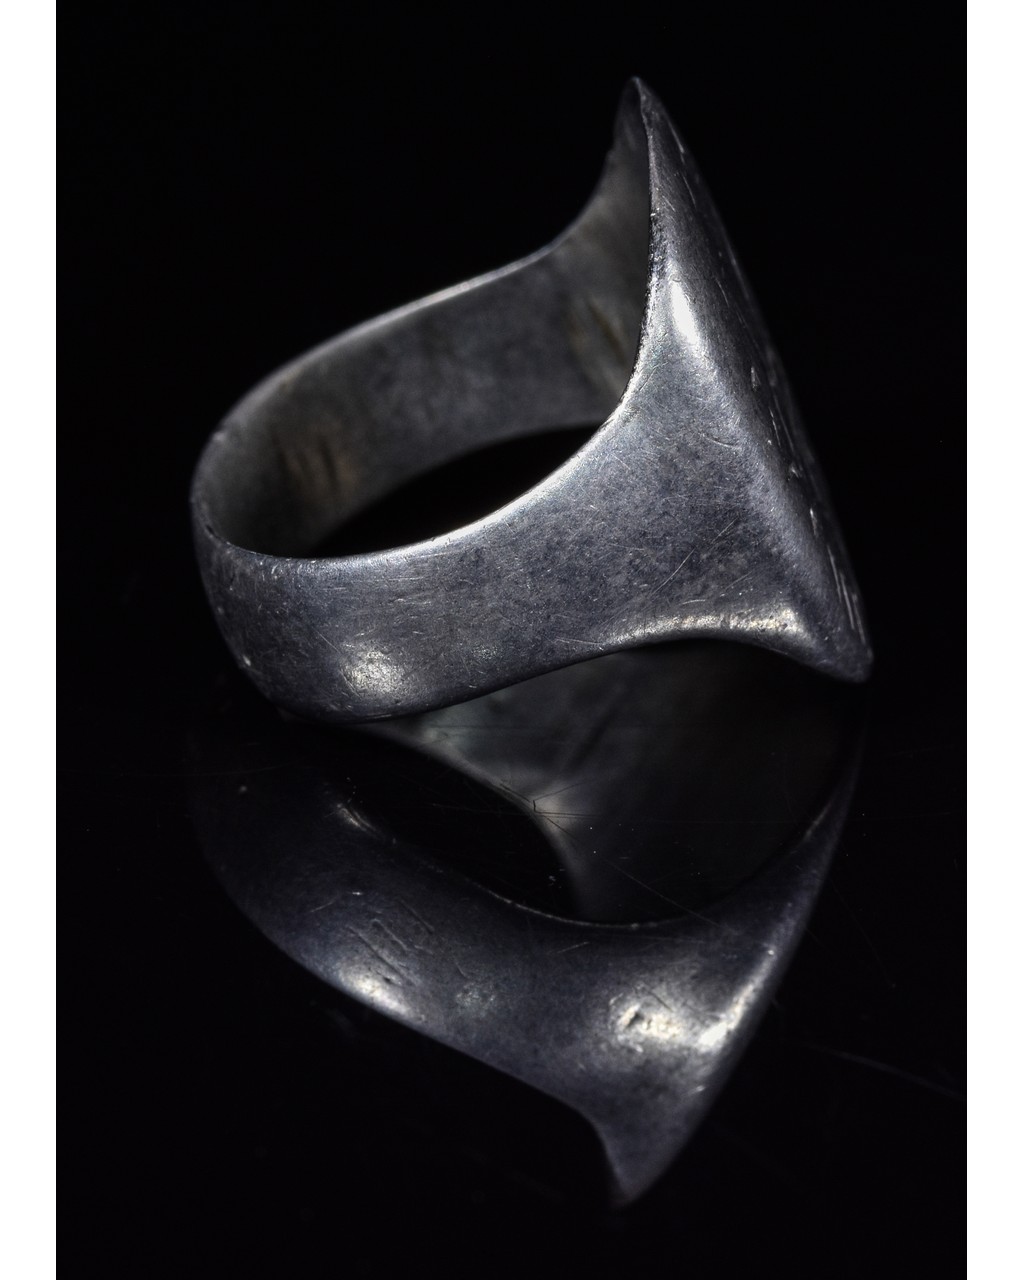 MEDIEVAL SILVER SEAL RING - BOW, ARROWS AND SCRIPT - Image 4 of 4